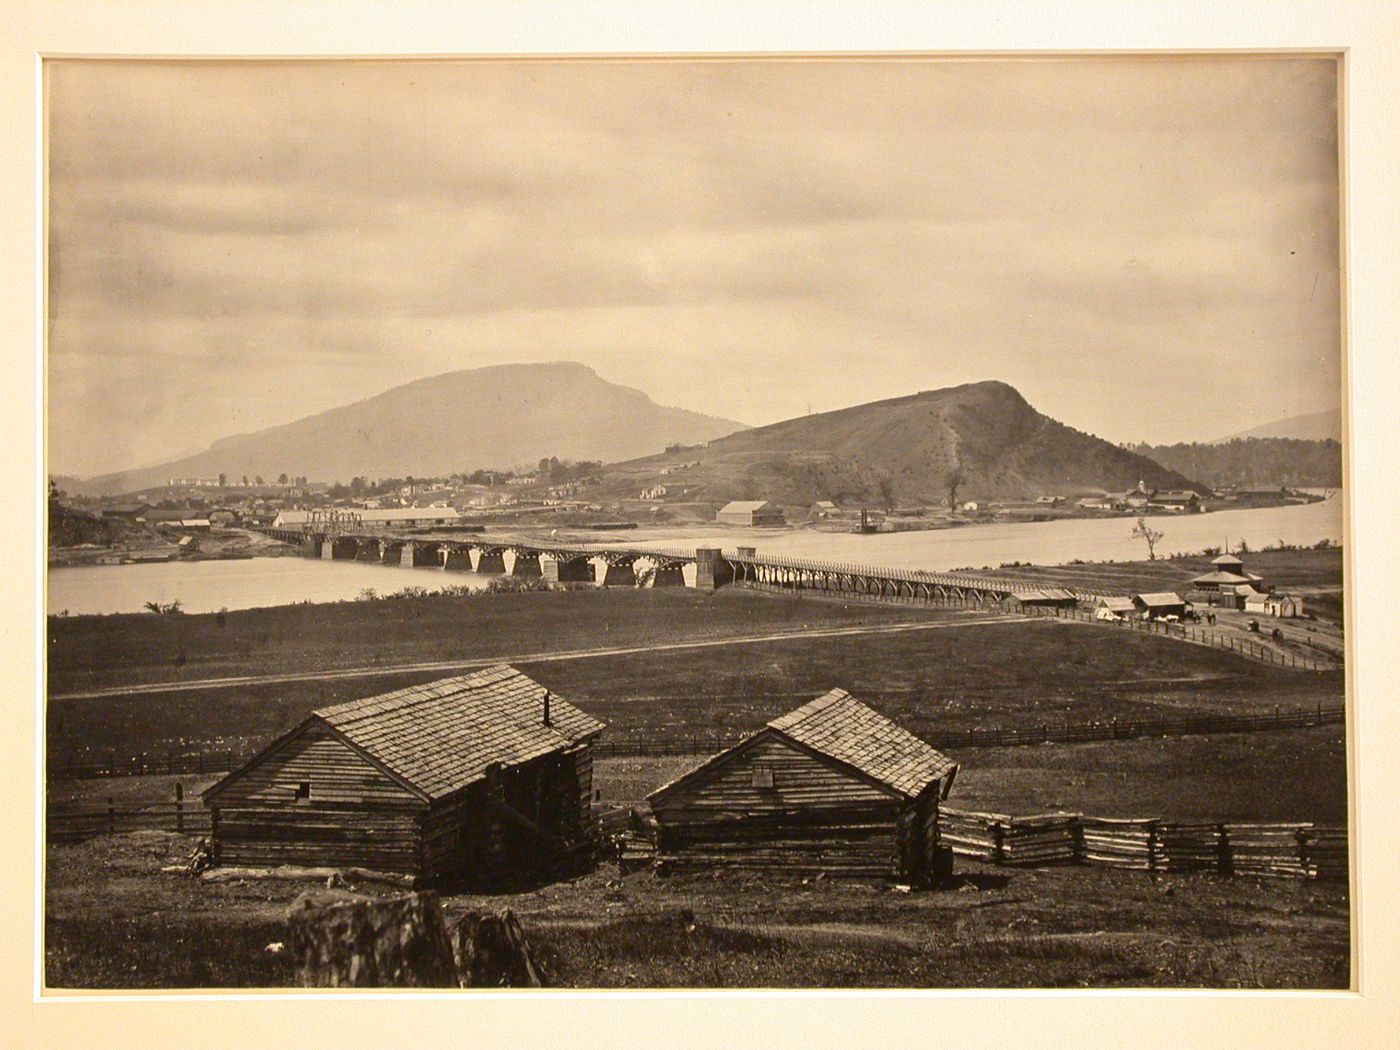 Chattanooga from the North